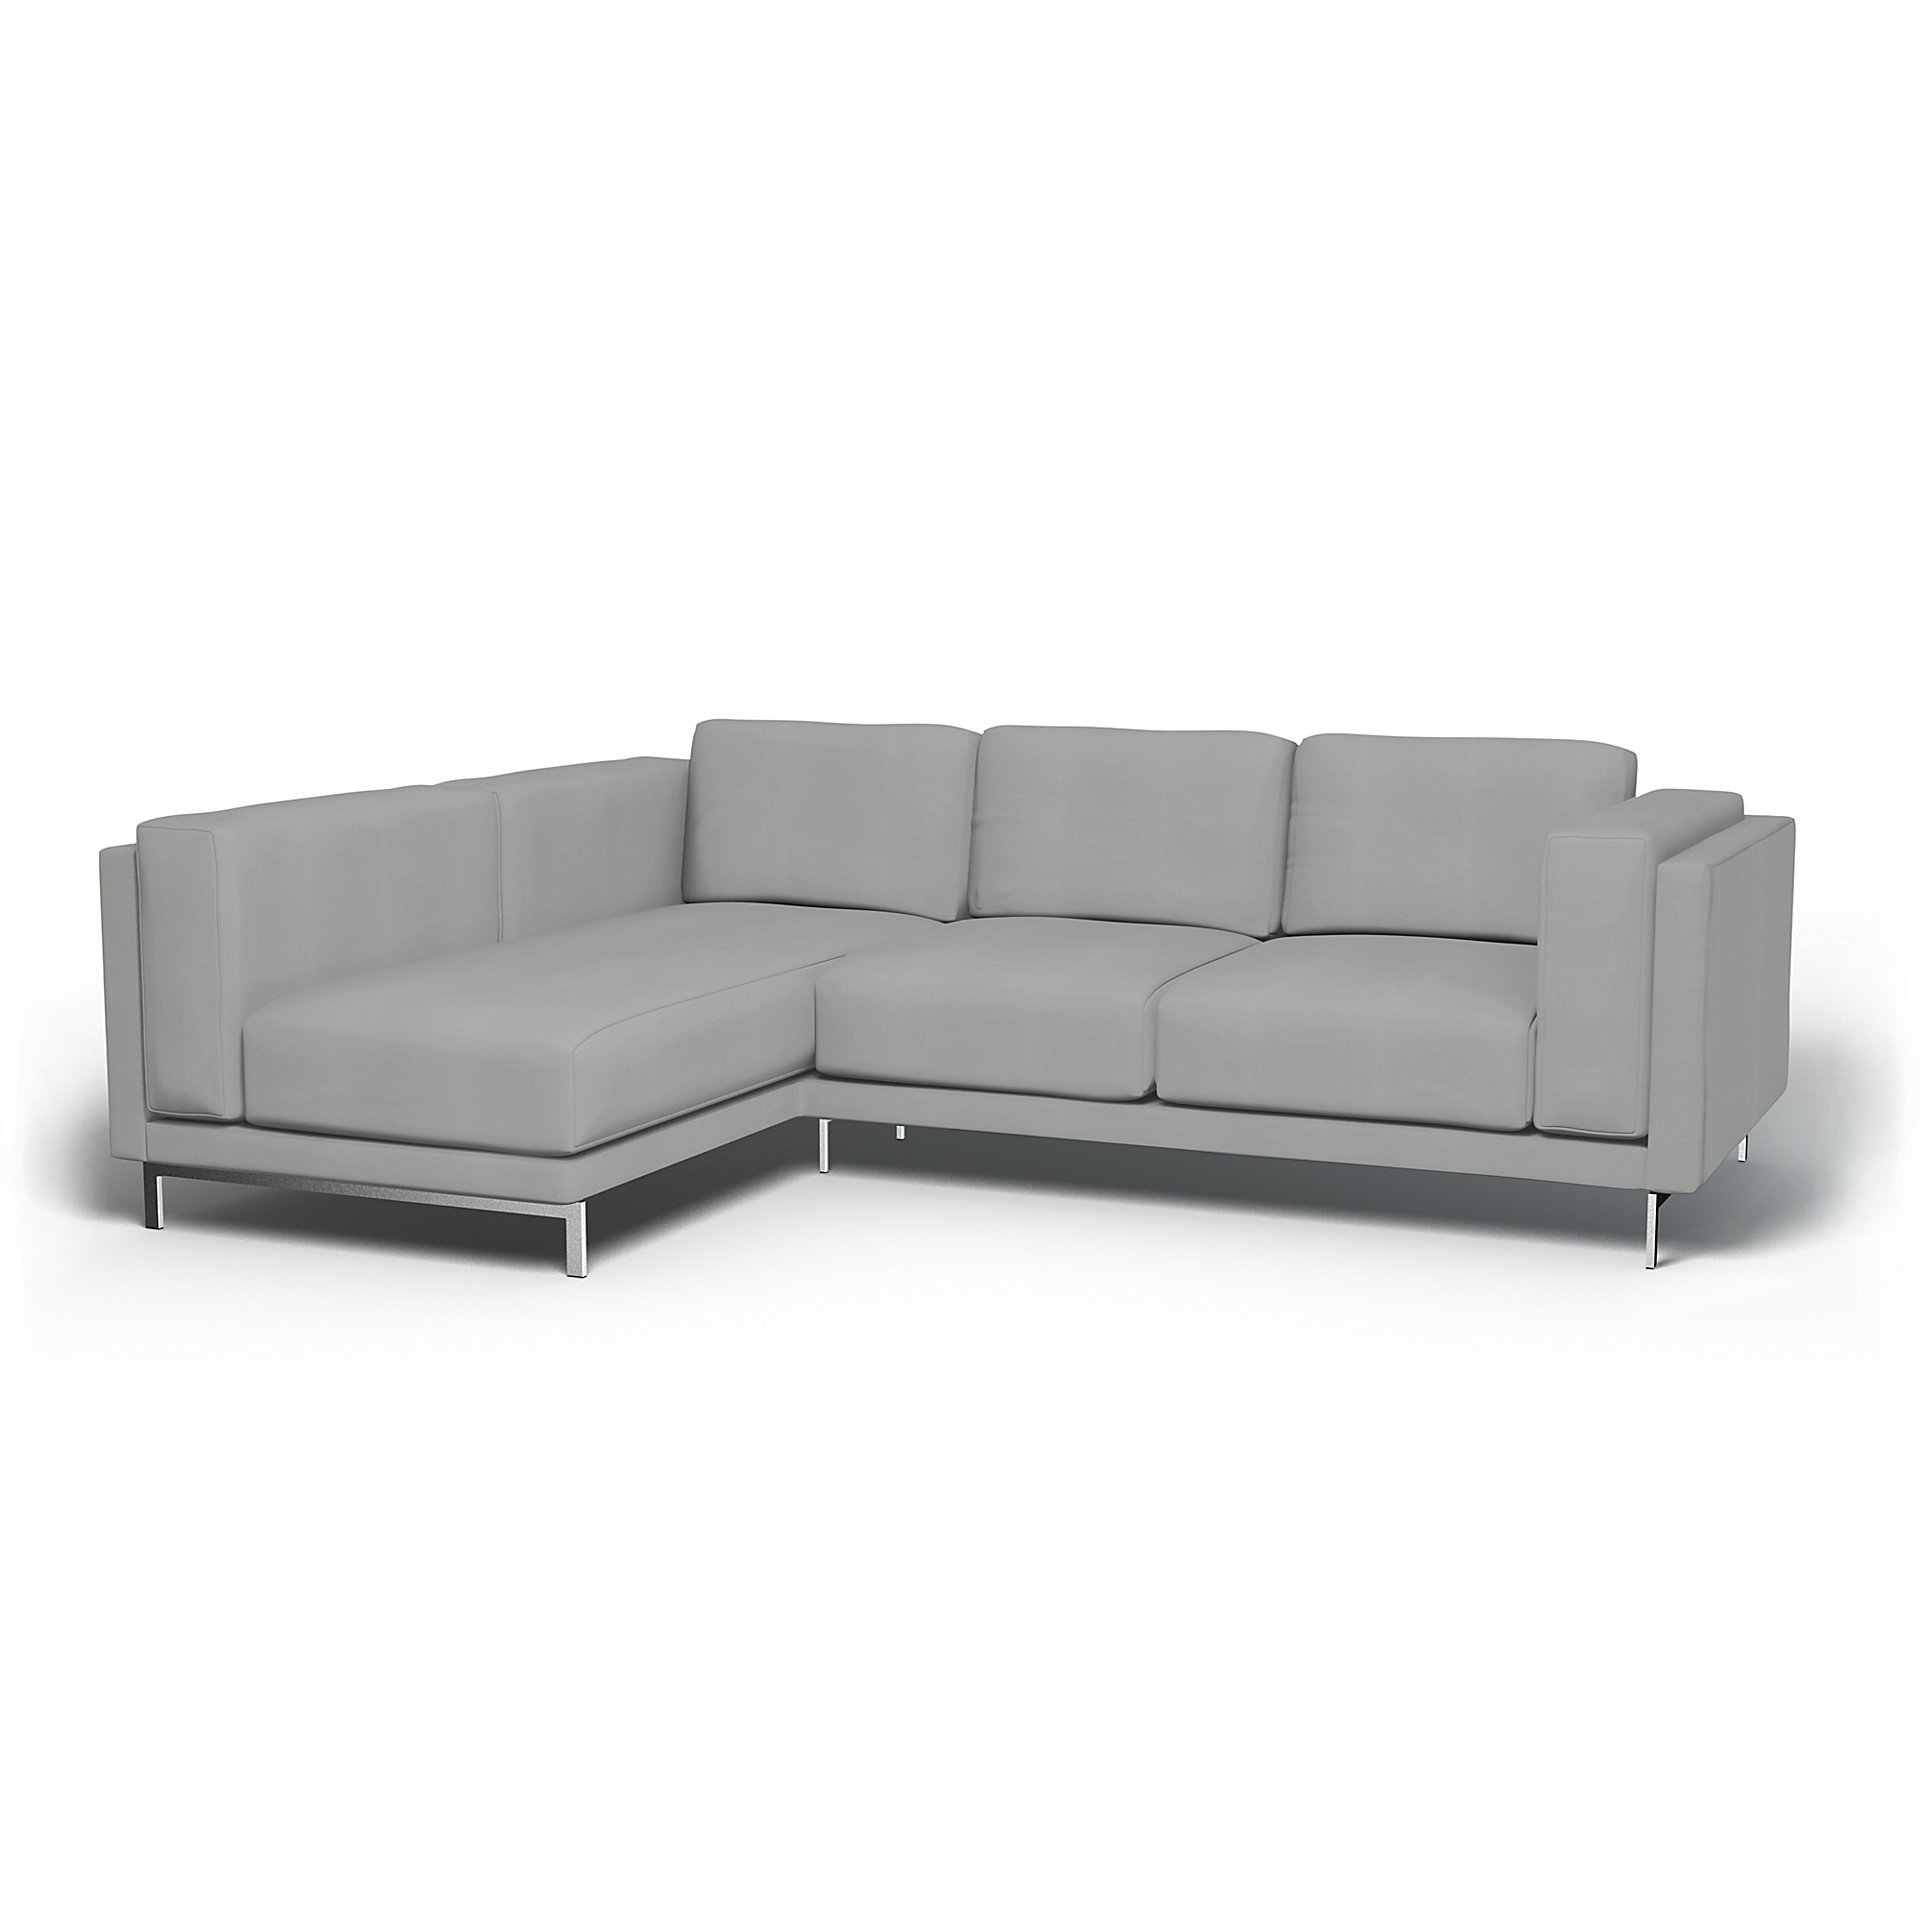 IKEA - Nockeby 3 Seater Sofa with Left Chaise Cover, Silver Grey, Cotton - Bemz